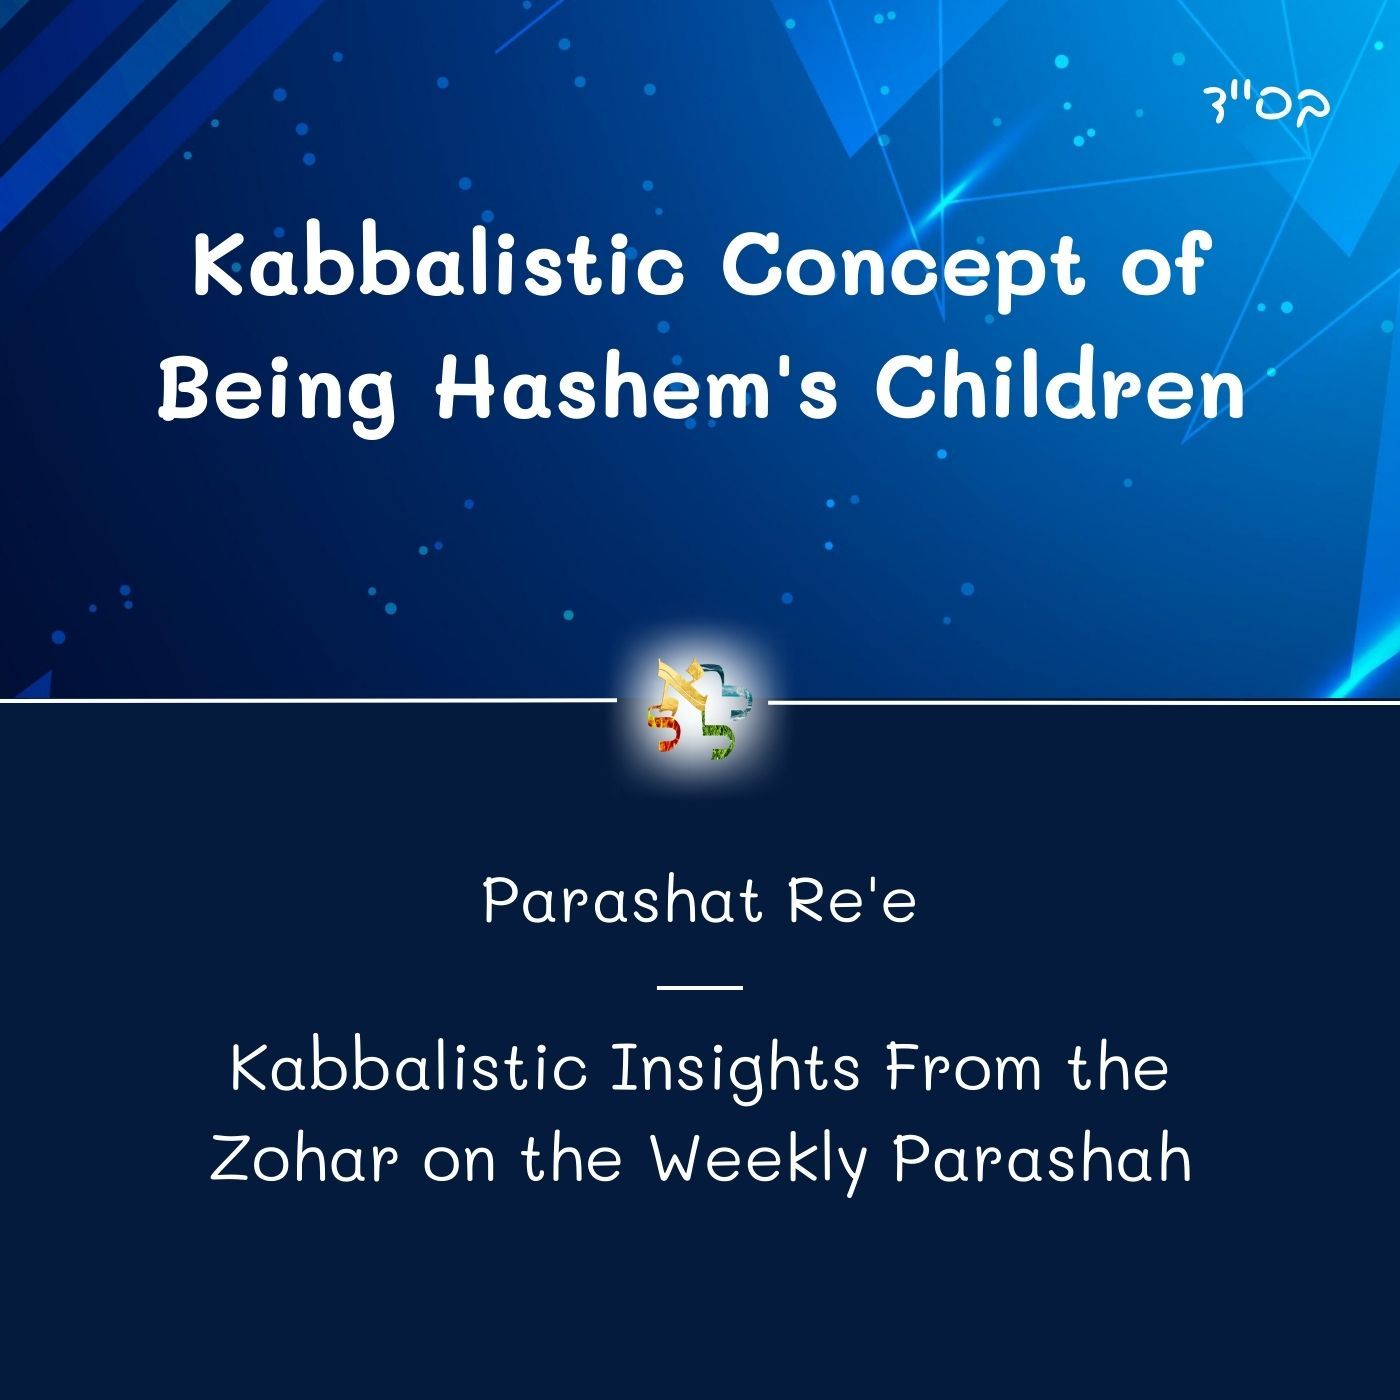 Kabbalistic Concept of Being Hashem's Children - Kabbalistic Inspiration on the Parasha from the Zohar